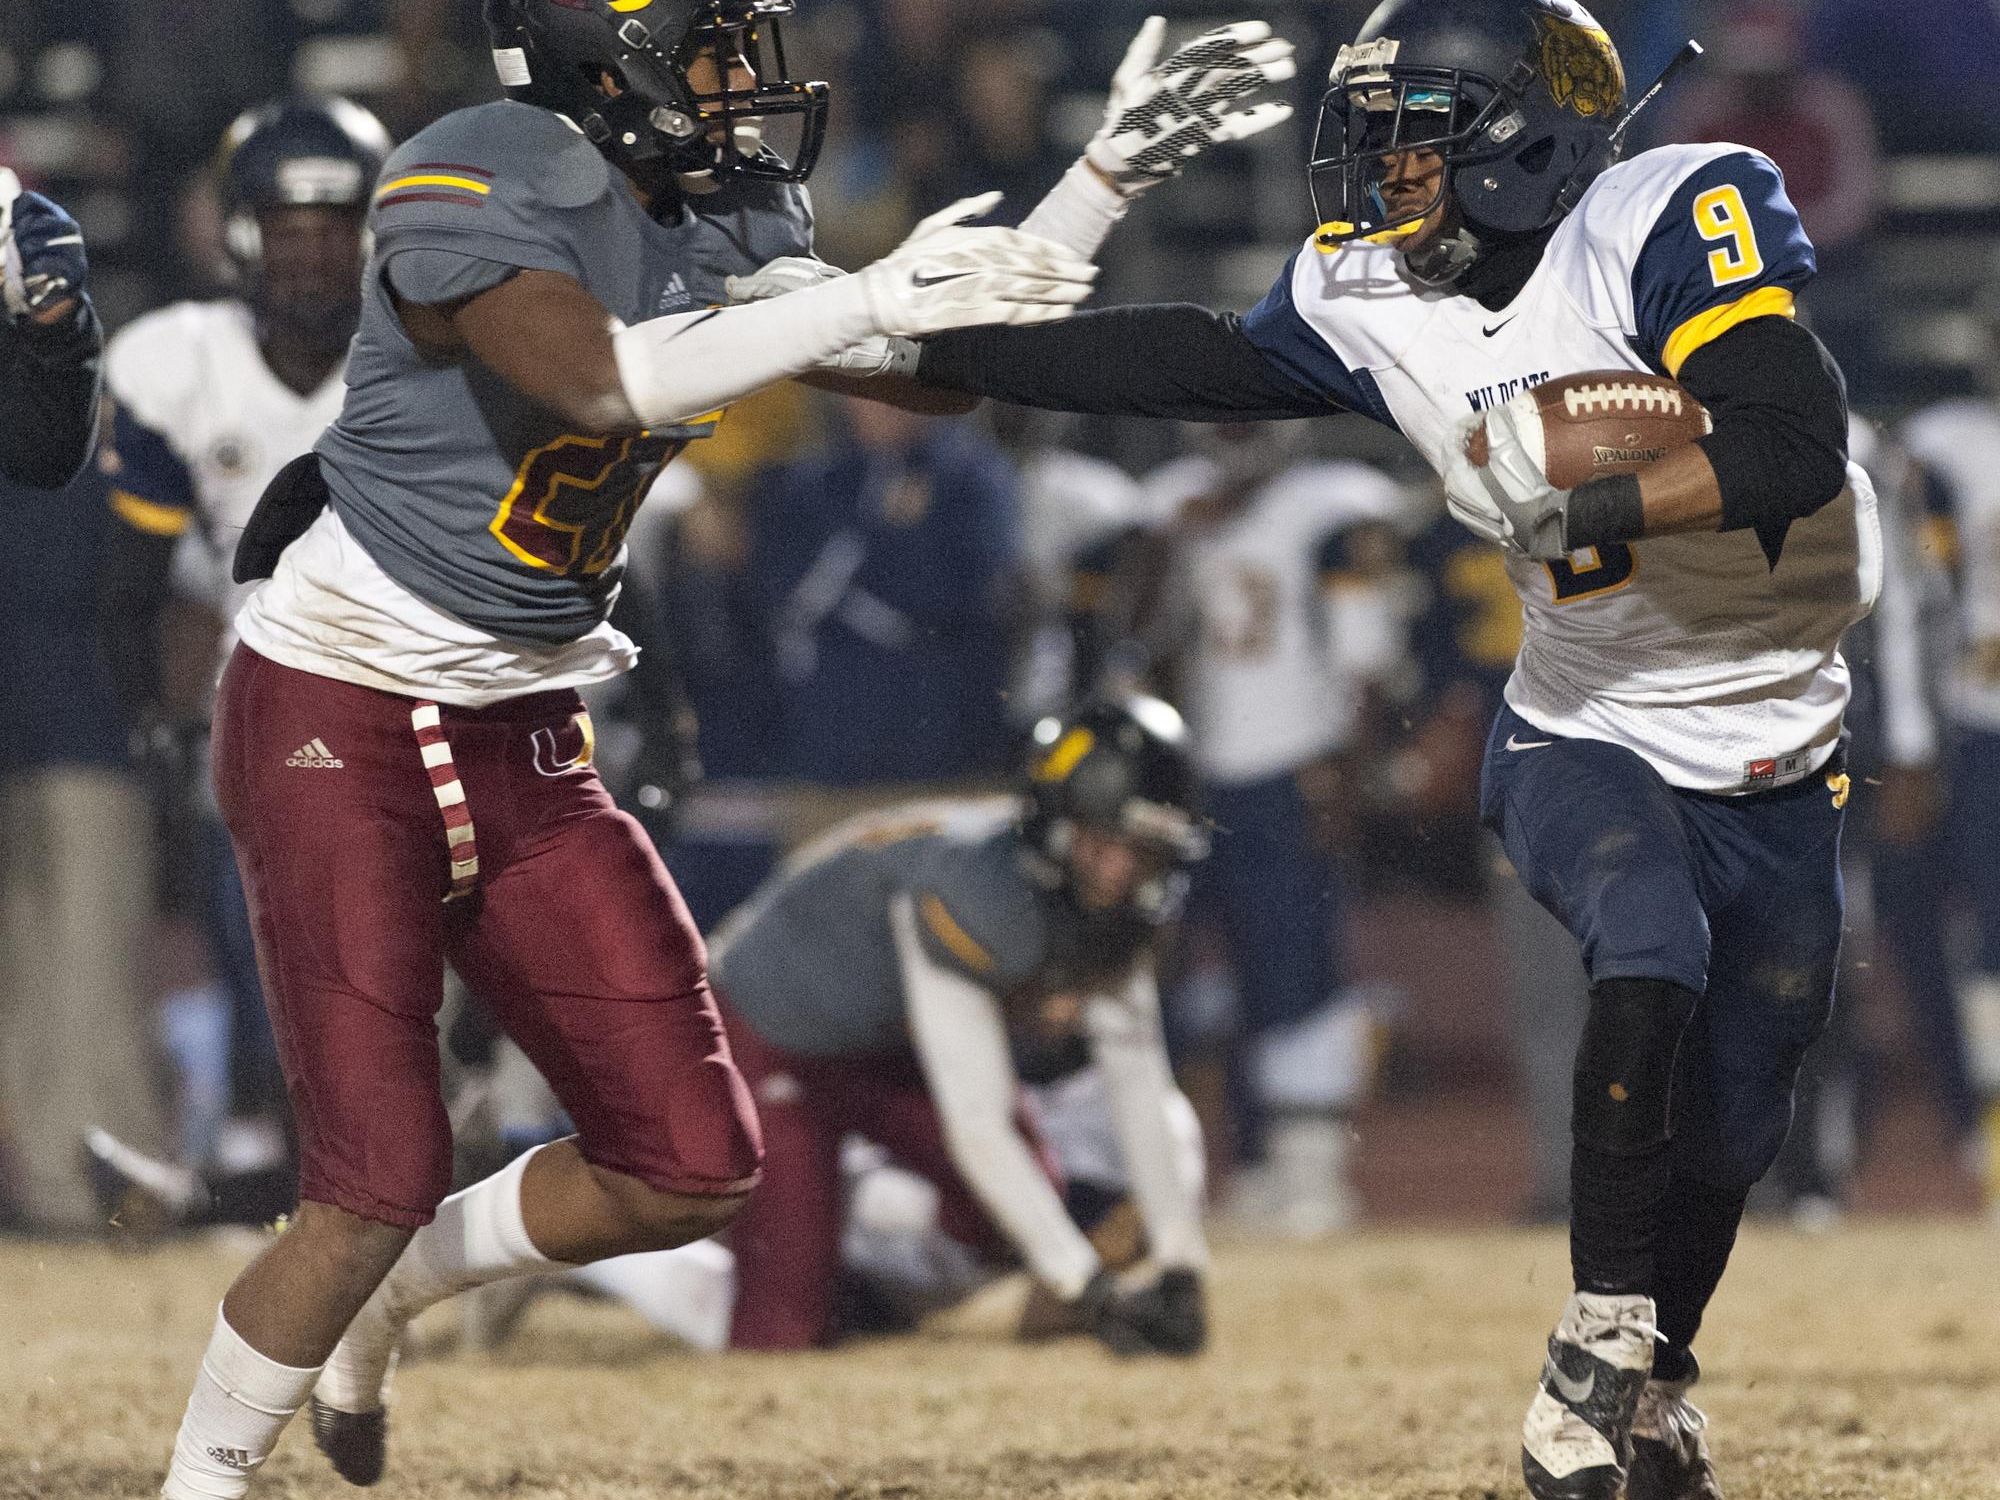 Sunnyside’s Aaron Mouton, right, gets by Tulare Union’s Xavier Alexander during Friday’s Central Section Division II quarterfinal game at Bob Mathias Stadium. Sunnyside won 46-14.